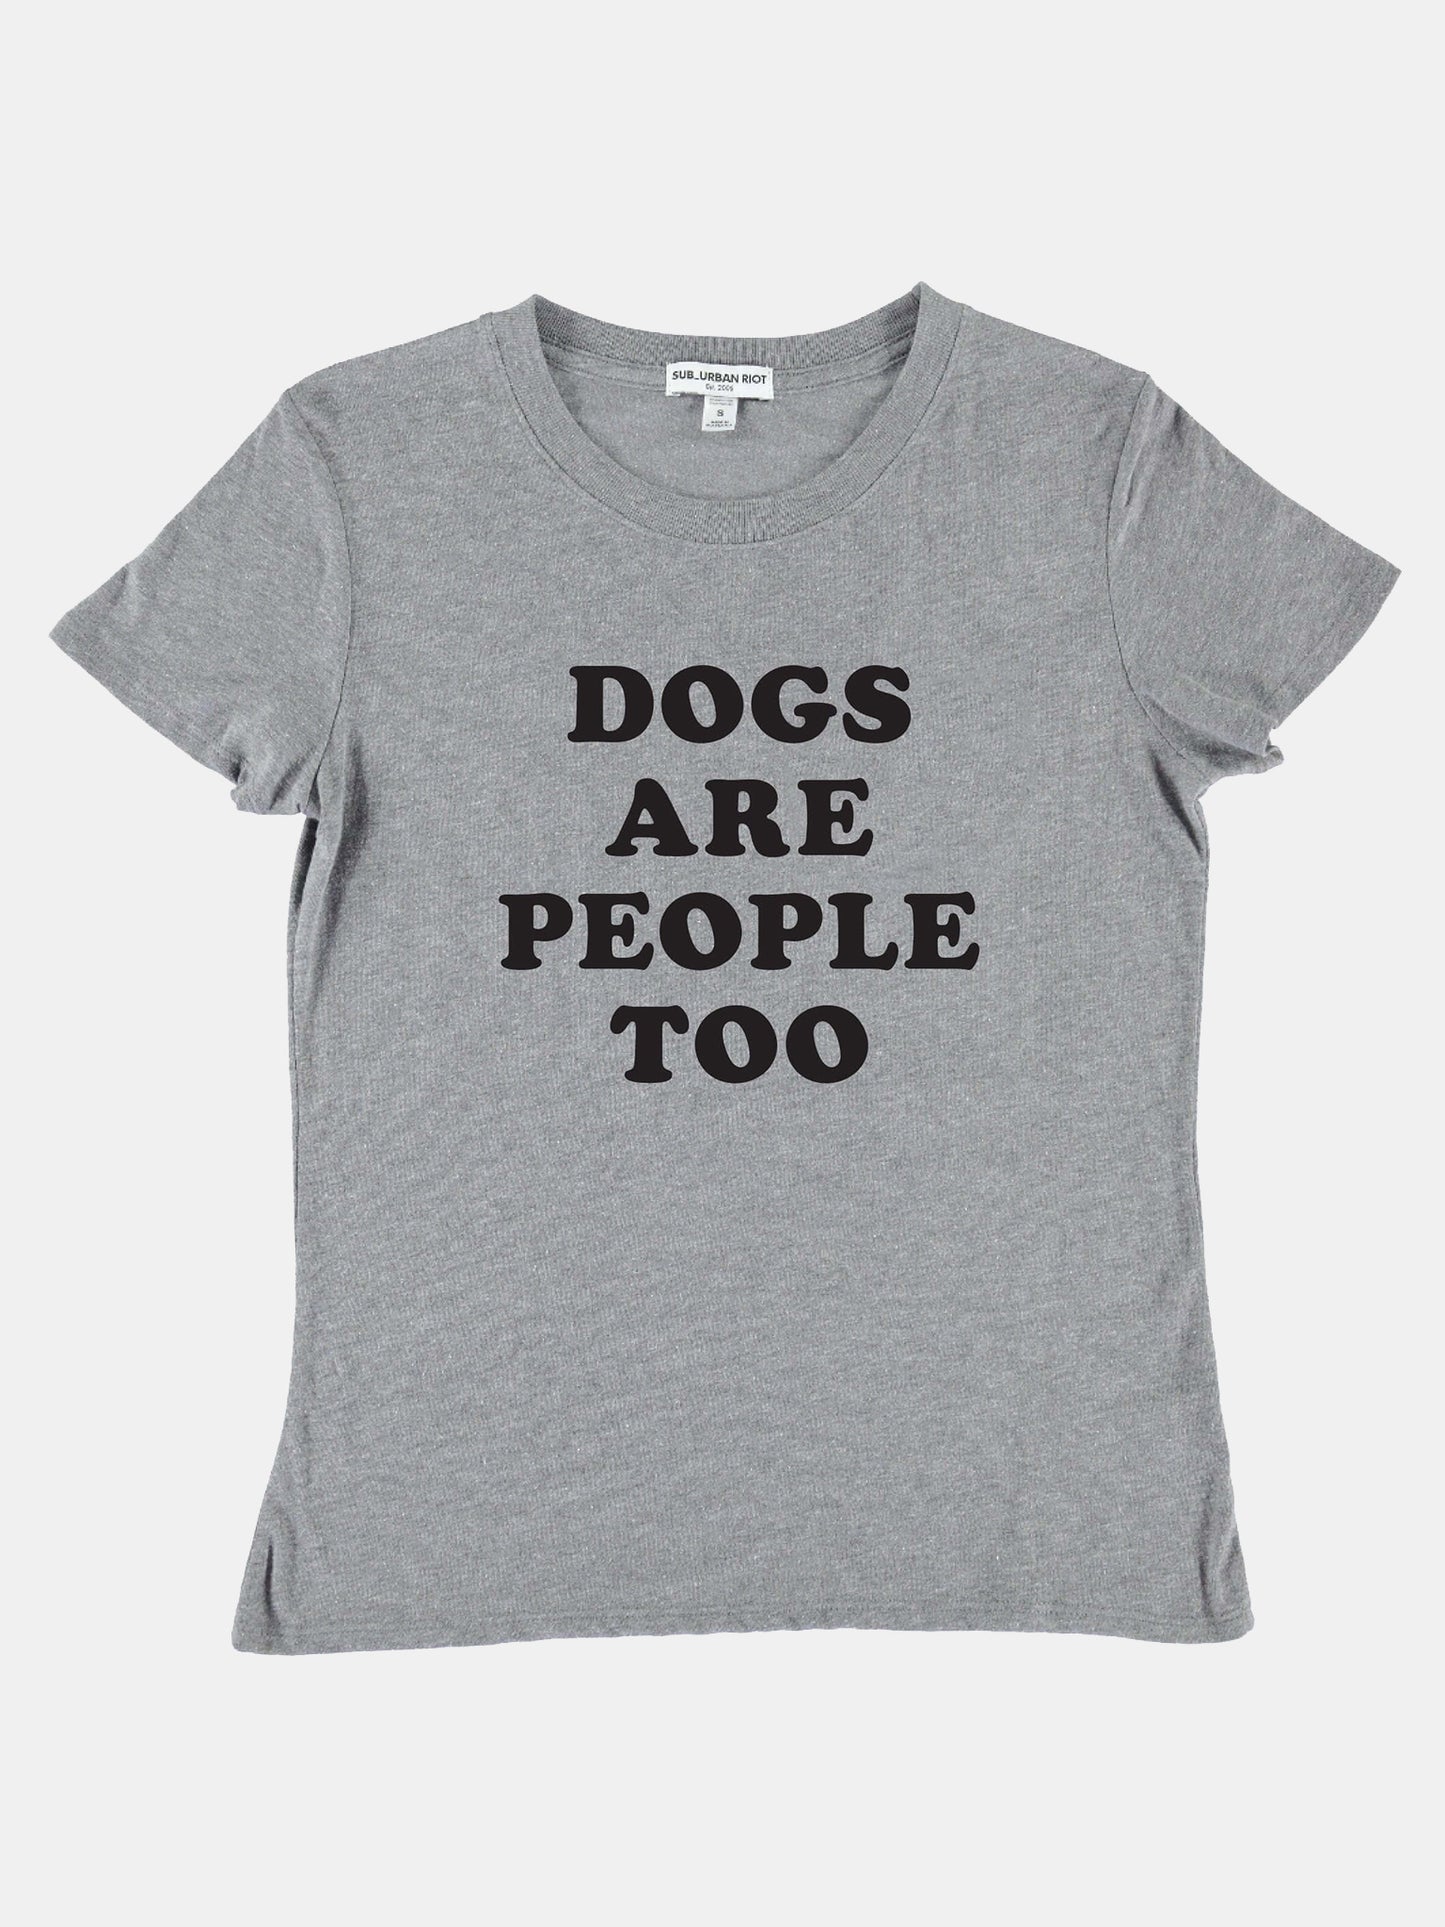 Sub_Urban Riot Girls' dogs Are People Too Loose Tee